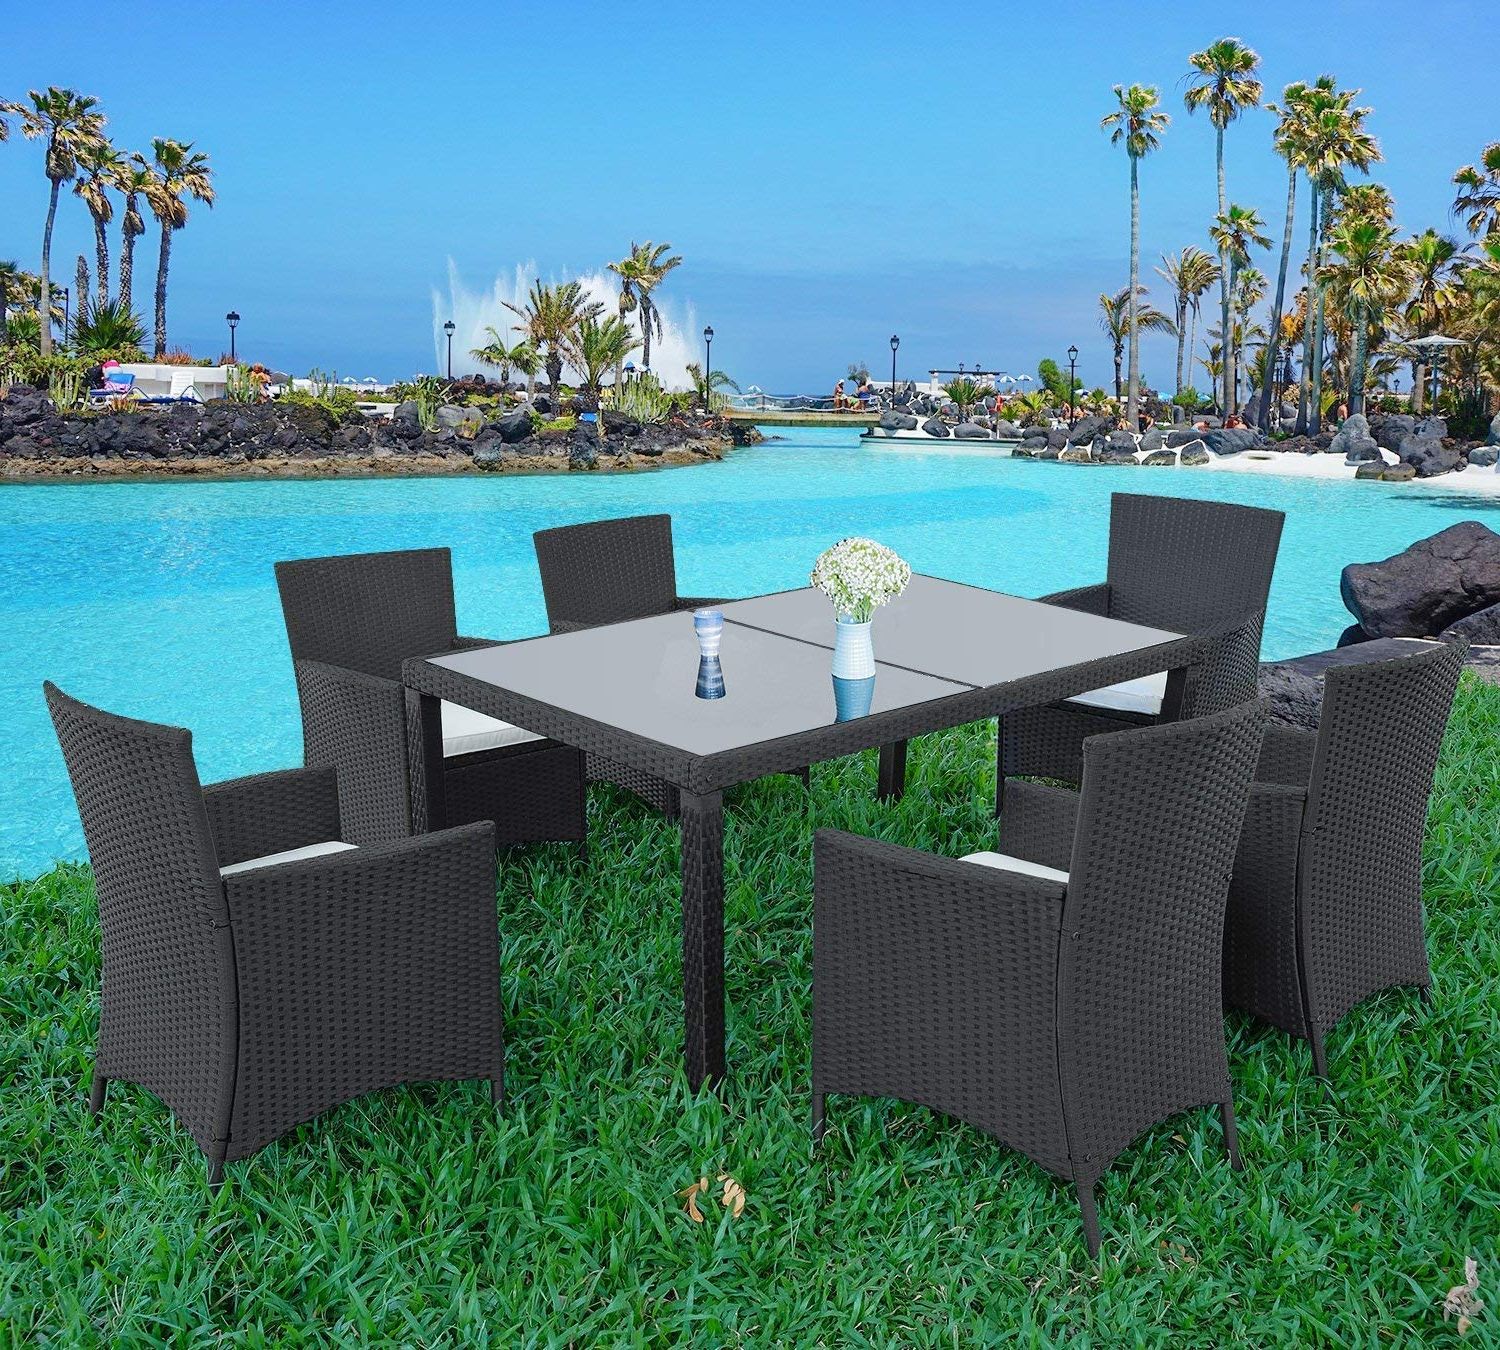 7 Piece Small Patio Dining Sets For Most Current Outdoor Dining Set, 7 Piece Wicker Furniture Conversation Set, 6 Rattan (View 10 of 15)